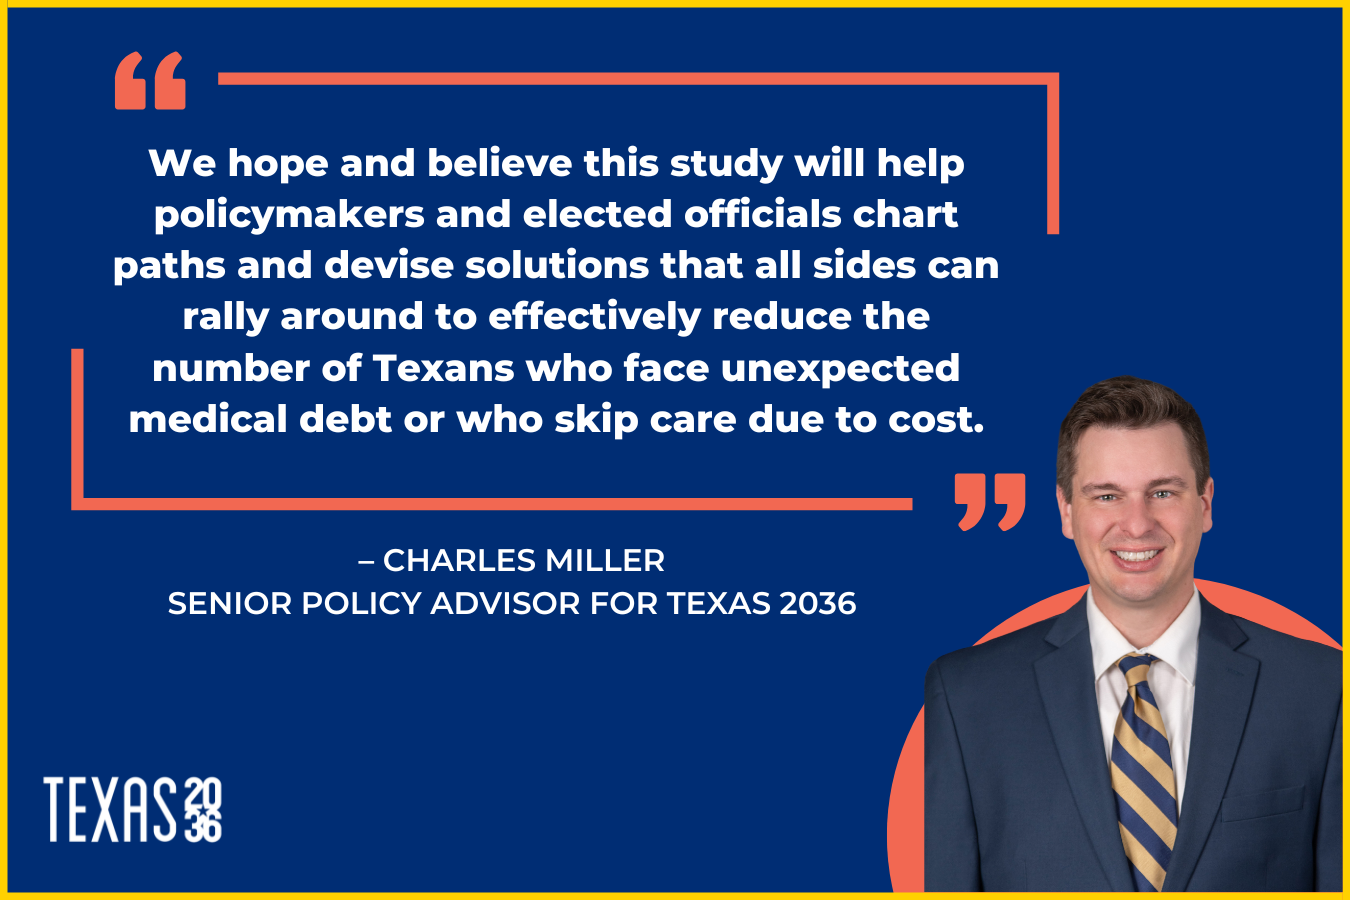 A blue quote card with an image in the bottom right of Texas 2036 Senior Policy Advisor Charles Miller. It states: "We hope and believe this study will help policymakers and elected officials chart paths and devise solutions that all sides can rally around to effectively reduce the number of Texans who face unexpected medical debt or who skip care due to cost."